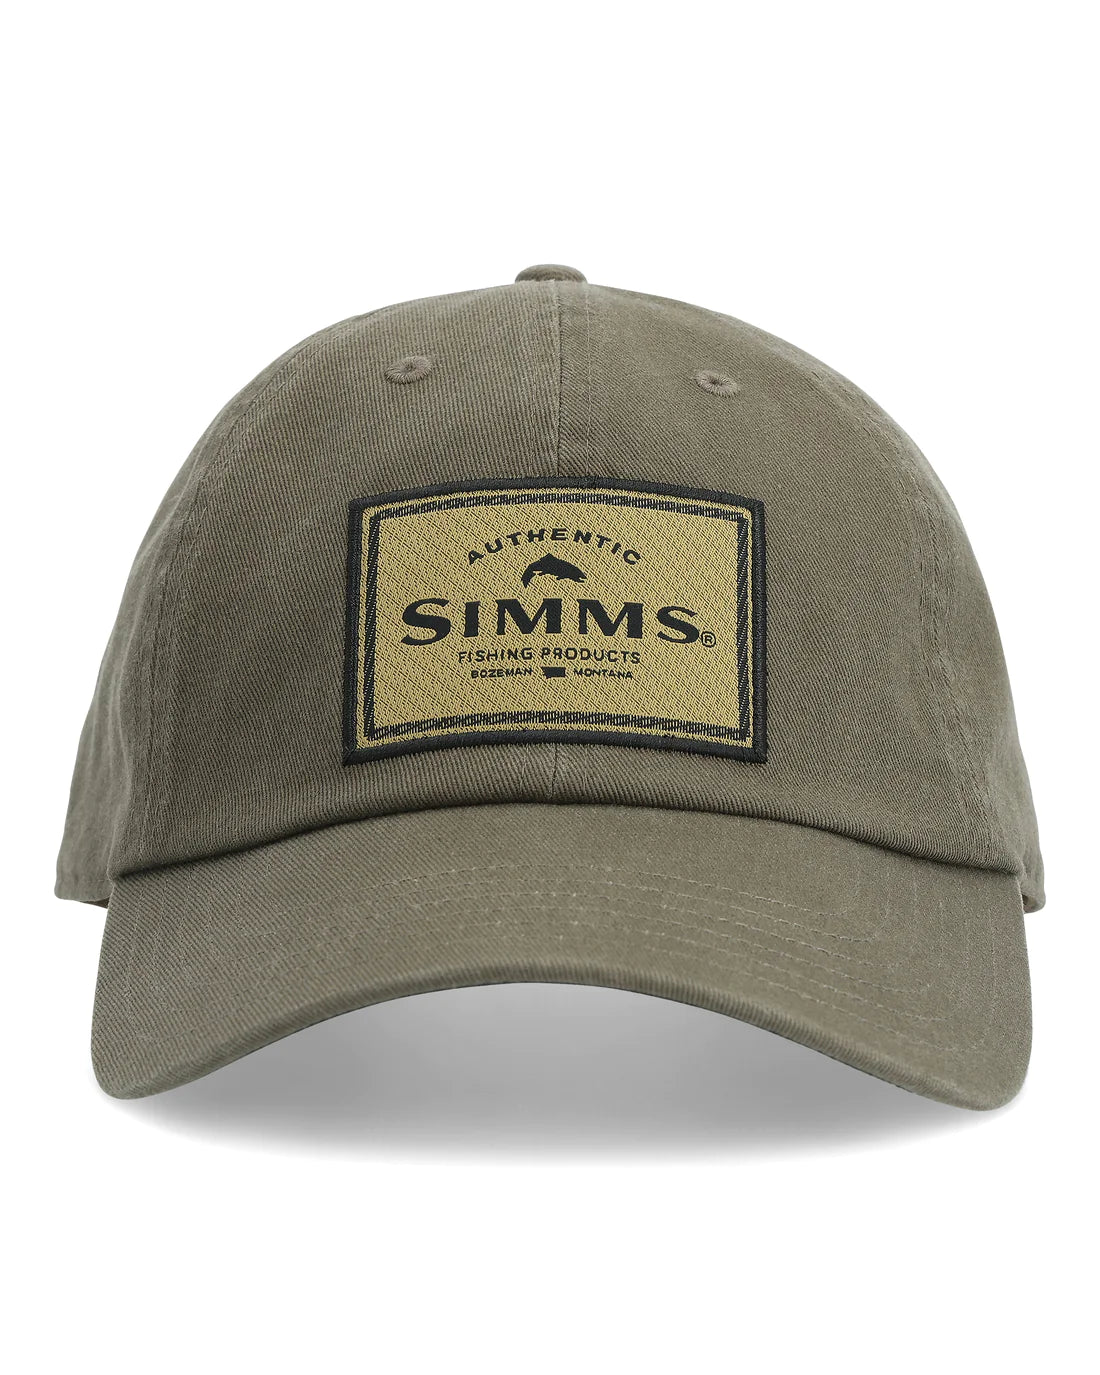 Simms Single Haul Cap - OSFM / FOREST GREEN - Mansfield Hunting & Fishing - Products to prepare for Corona Virus